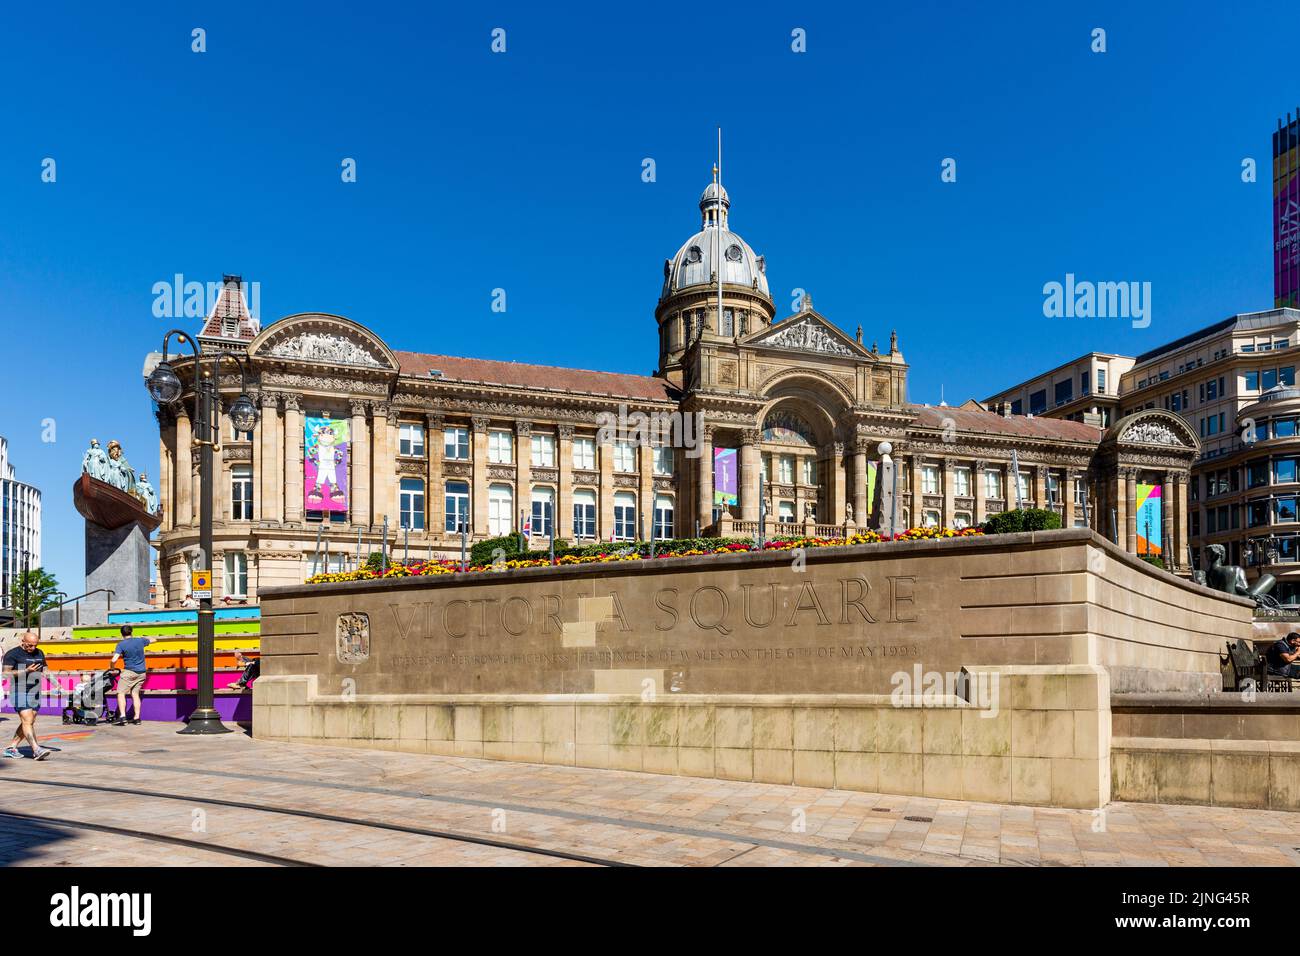 BIRMINGHAM, UK - AUGUST 11, 2022.  A landscape view of Victoria Square in Birmingham city centre with The Council House and sign prominent Stock Photo